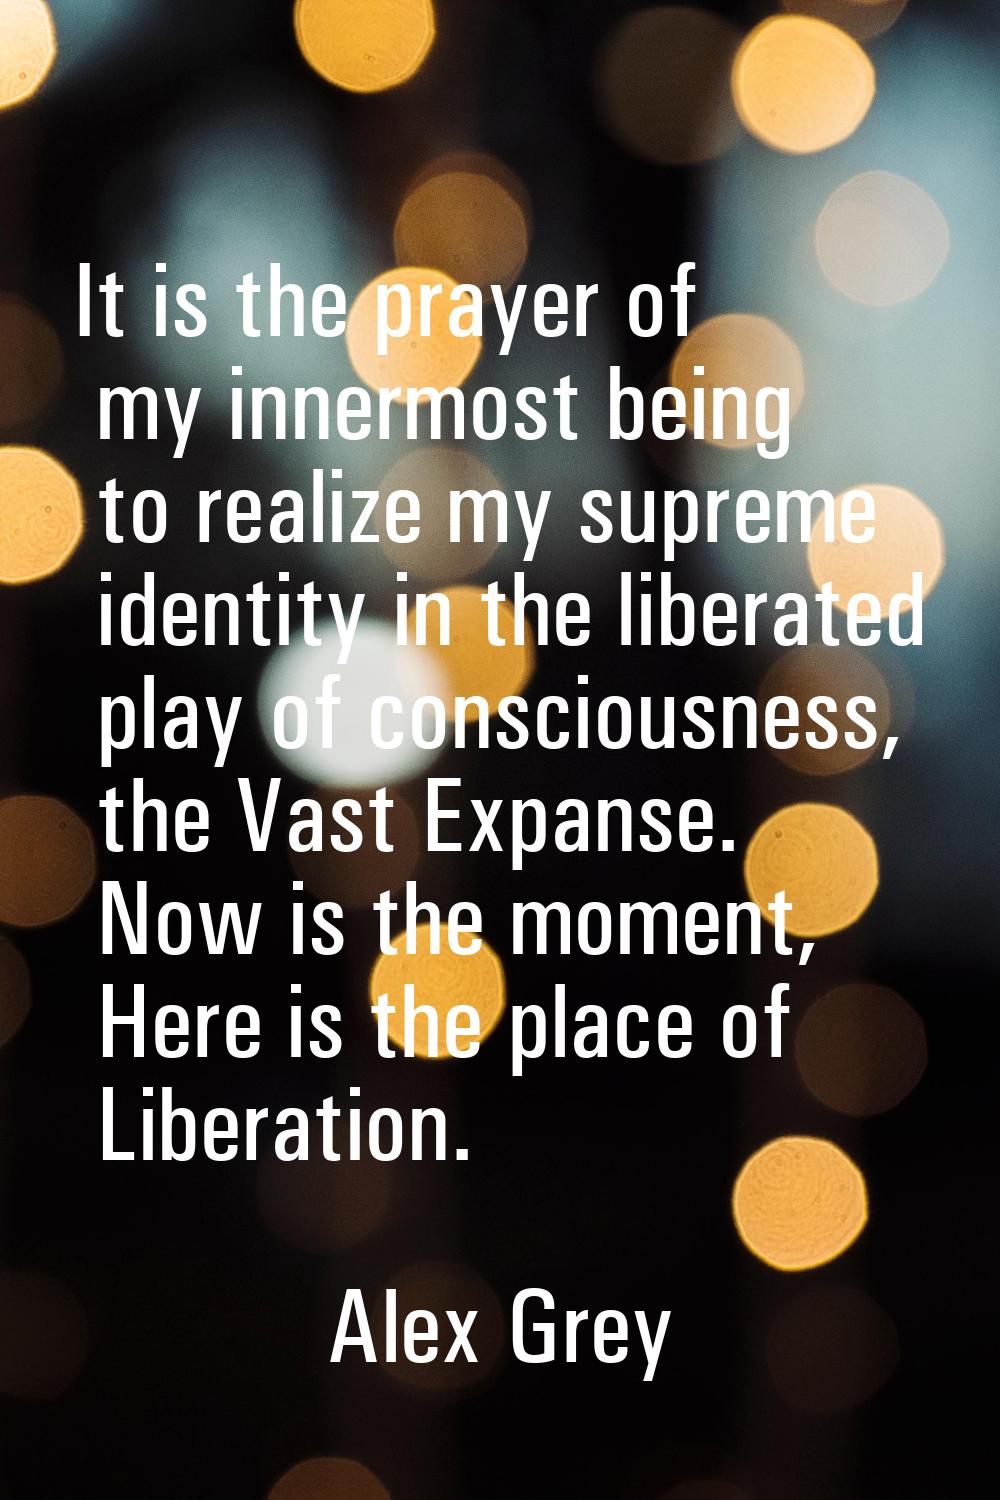 It is the prayer of my innermost being to realize my supreme identity in the liberated play of cons